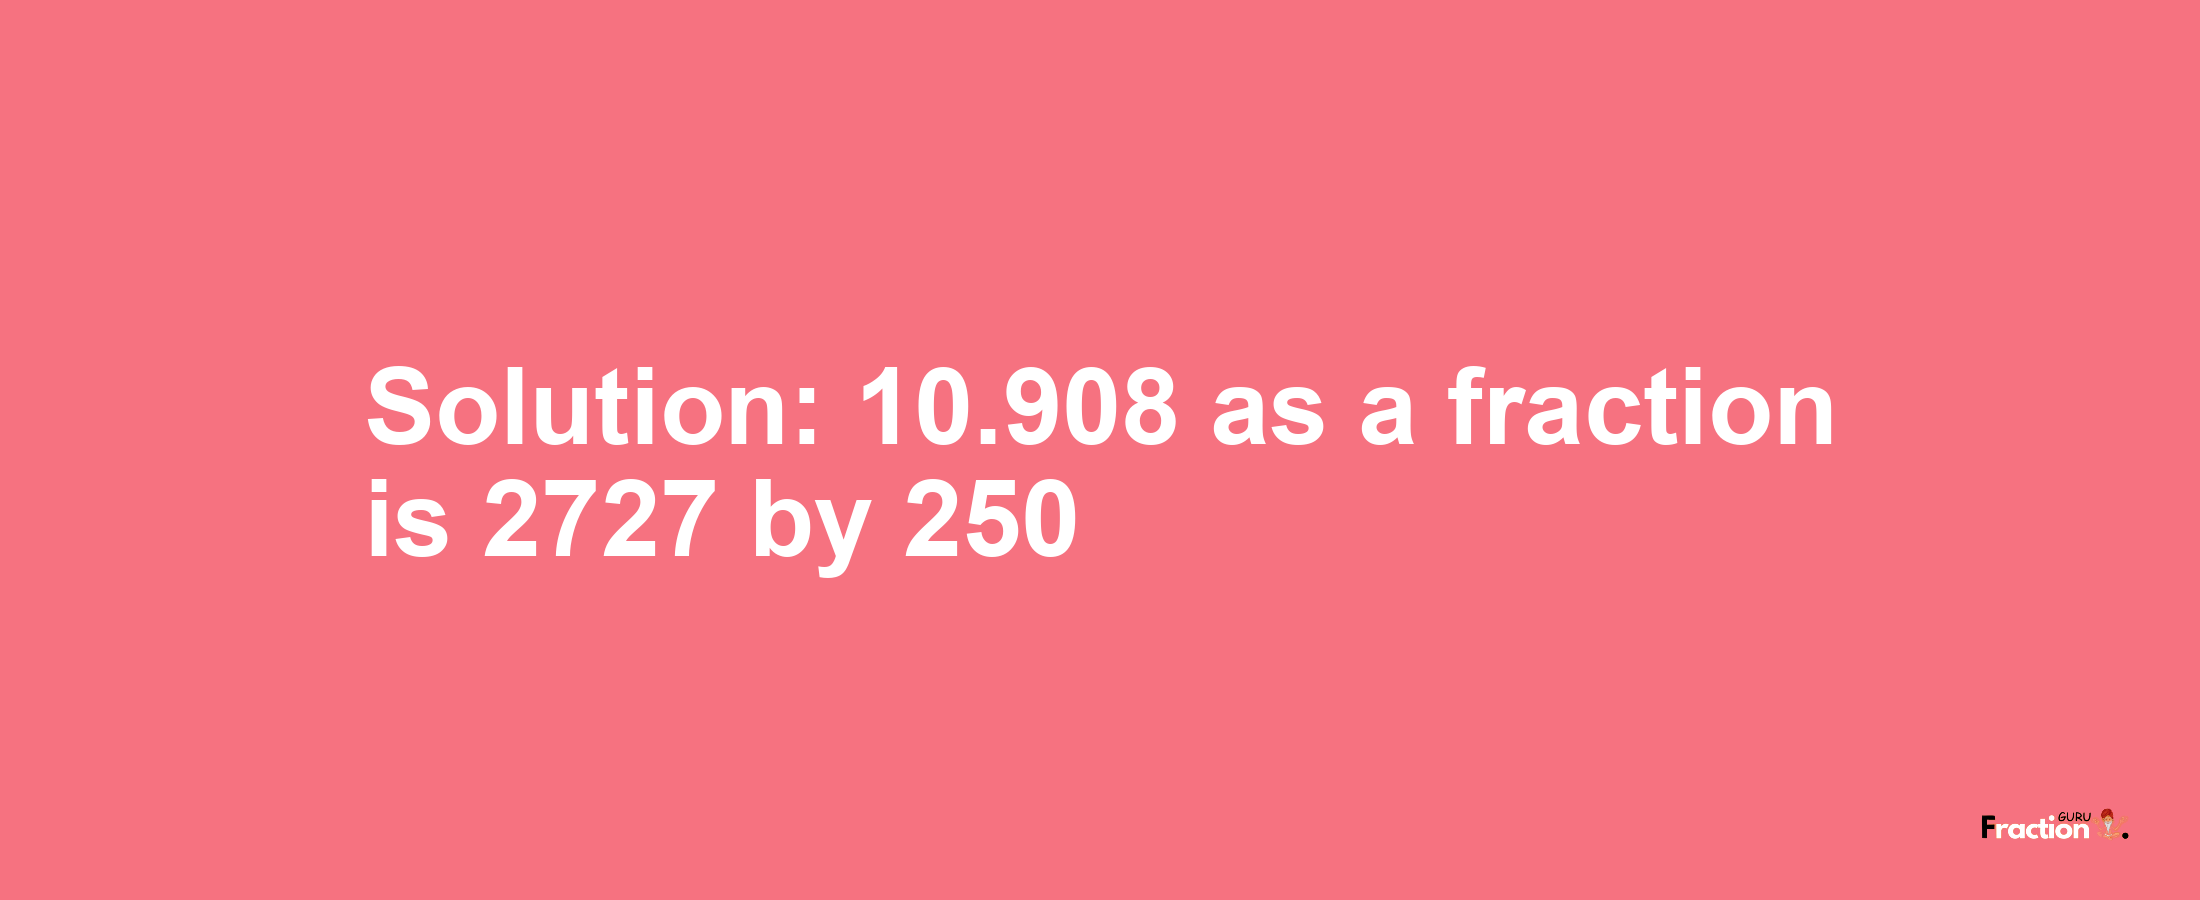 Solution:10.908 as a fraction is 2727/250